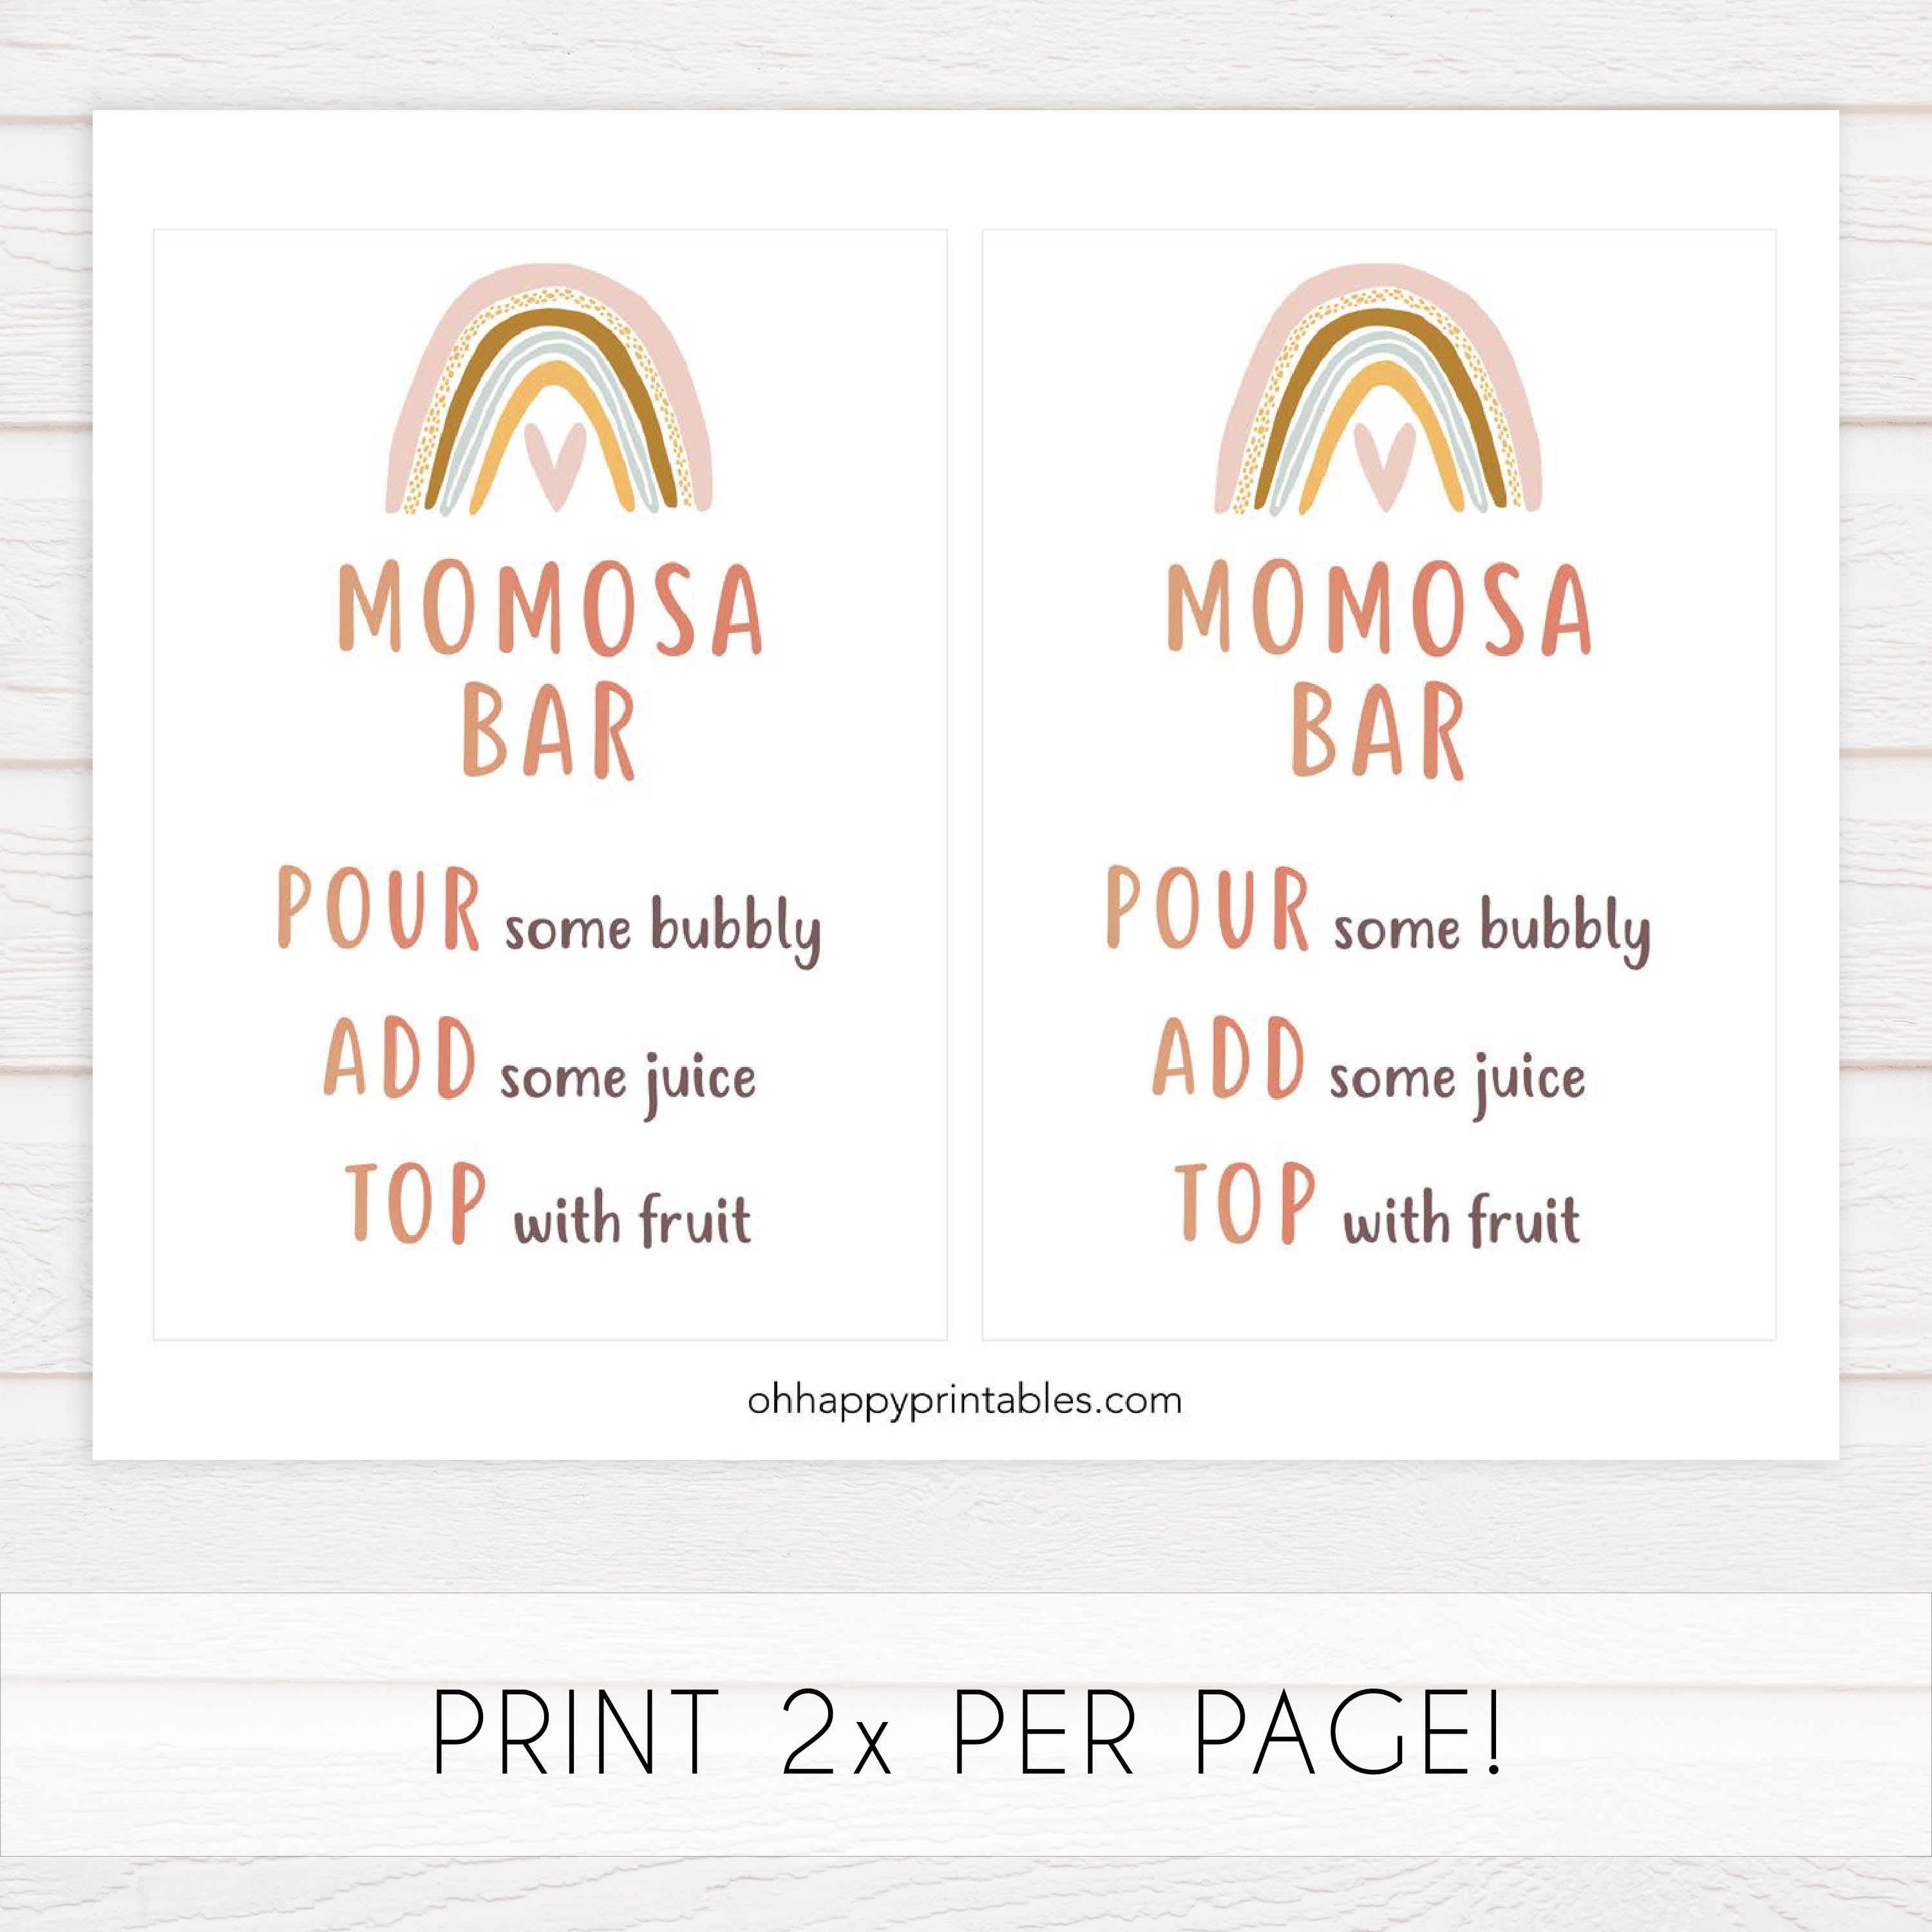 momosa baby table signs, Printable baby shower games, boho rainbow baby games, baby shower games, fun baby shower ideas, top baby shower ideas, boho rainbow baby shower, baby shower games, fun boho rainbow baby shower ideas